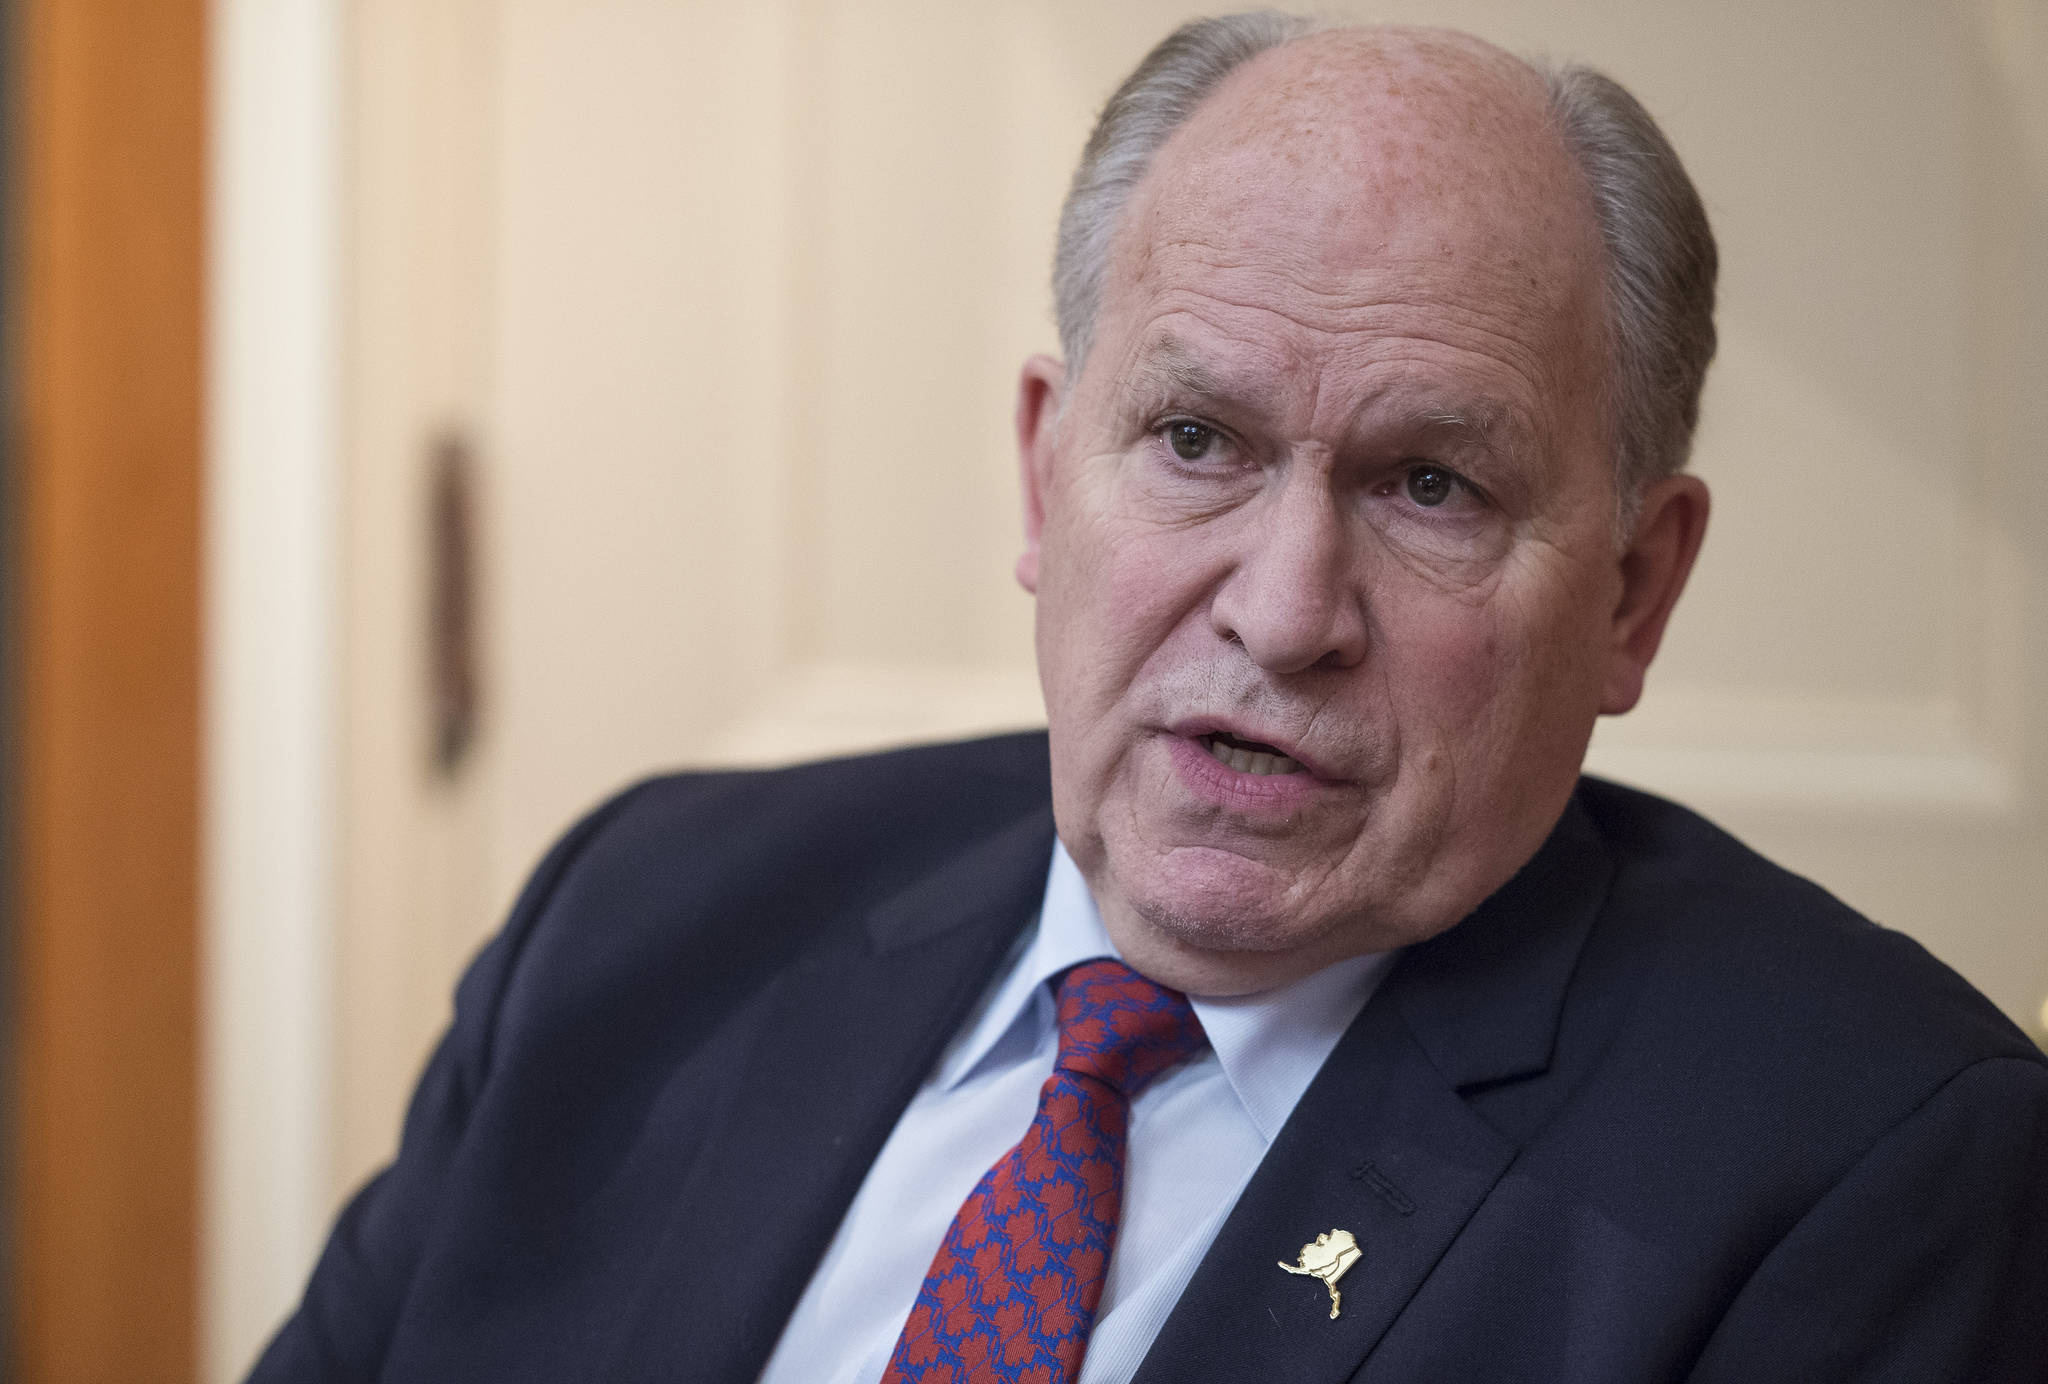 Gov. Bill Walker answers a range of questions during an interview with the Empire in his Capitol office on Friday, Jan. 5, 2018. (Michael Penn | Juneau Empire File)